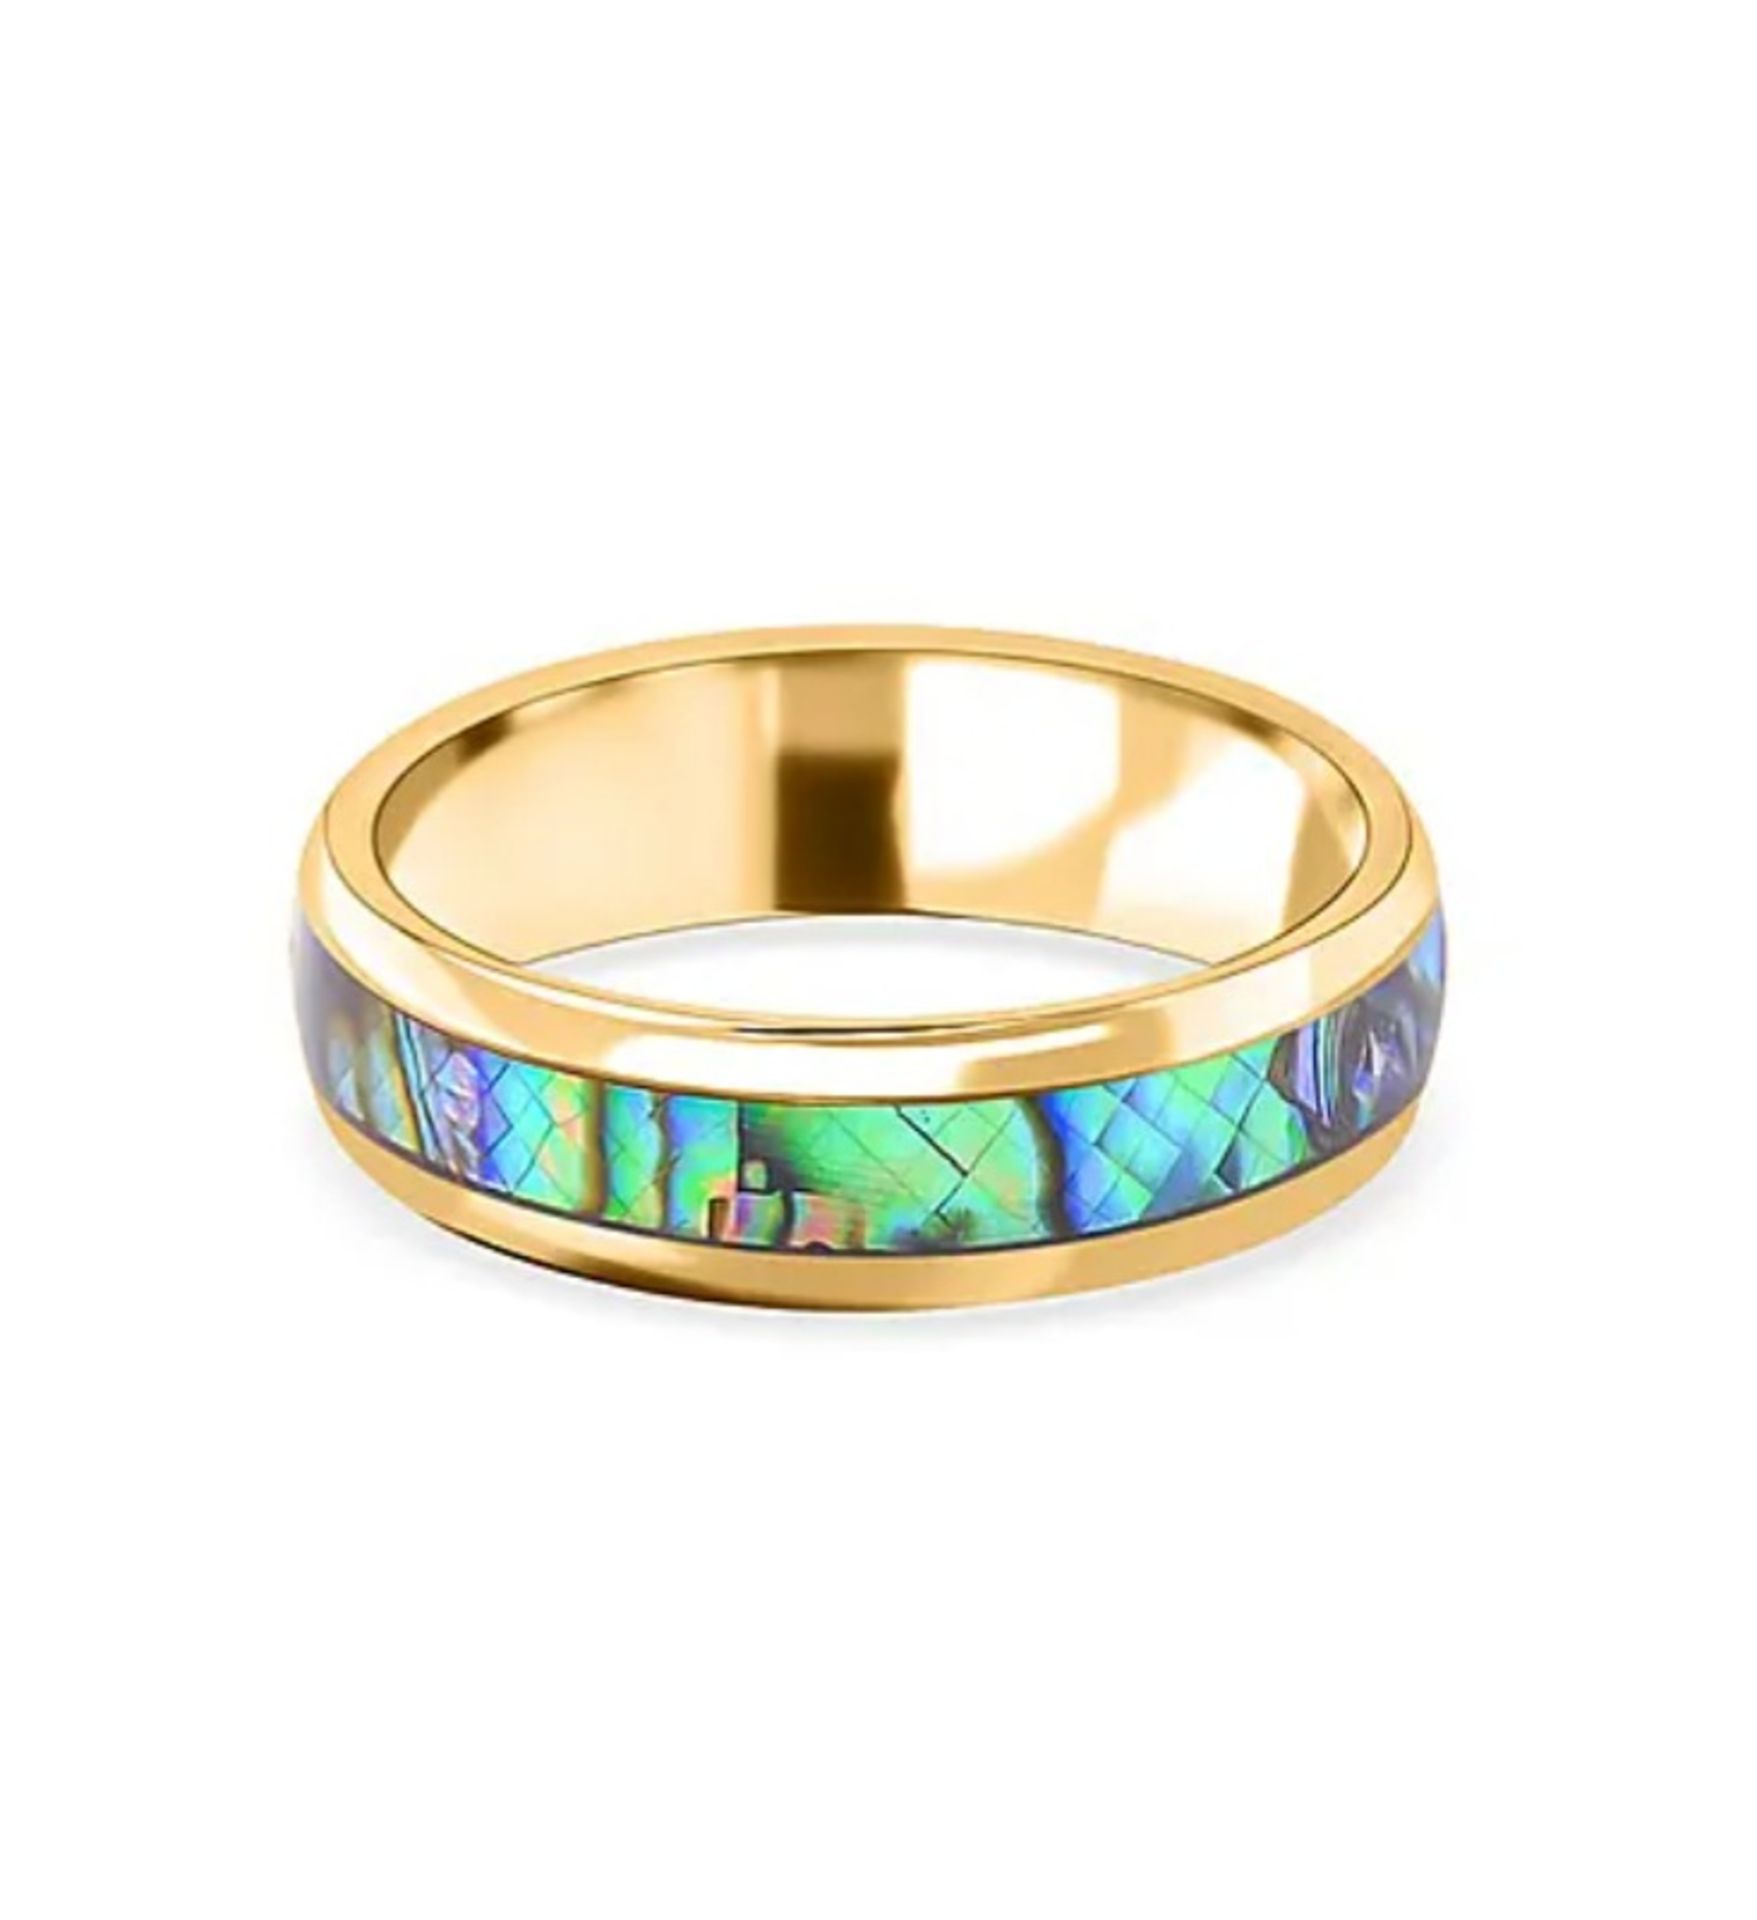 NEW! Abalone Shell Band Ring - Image 3 of 4